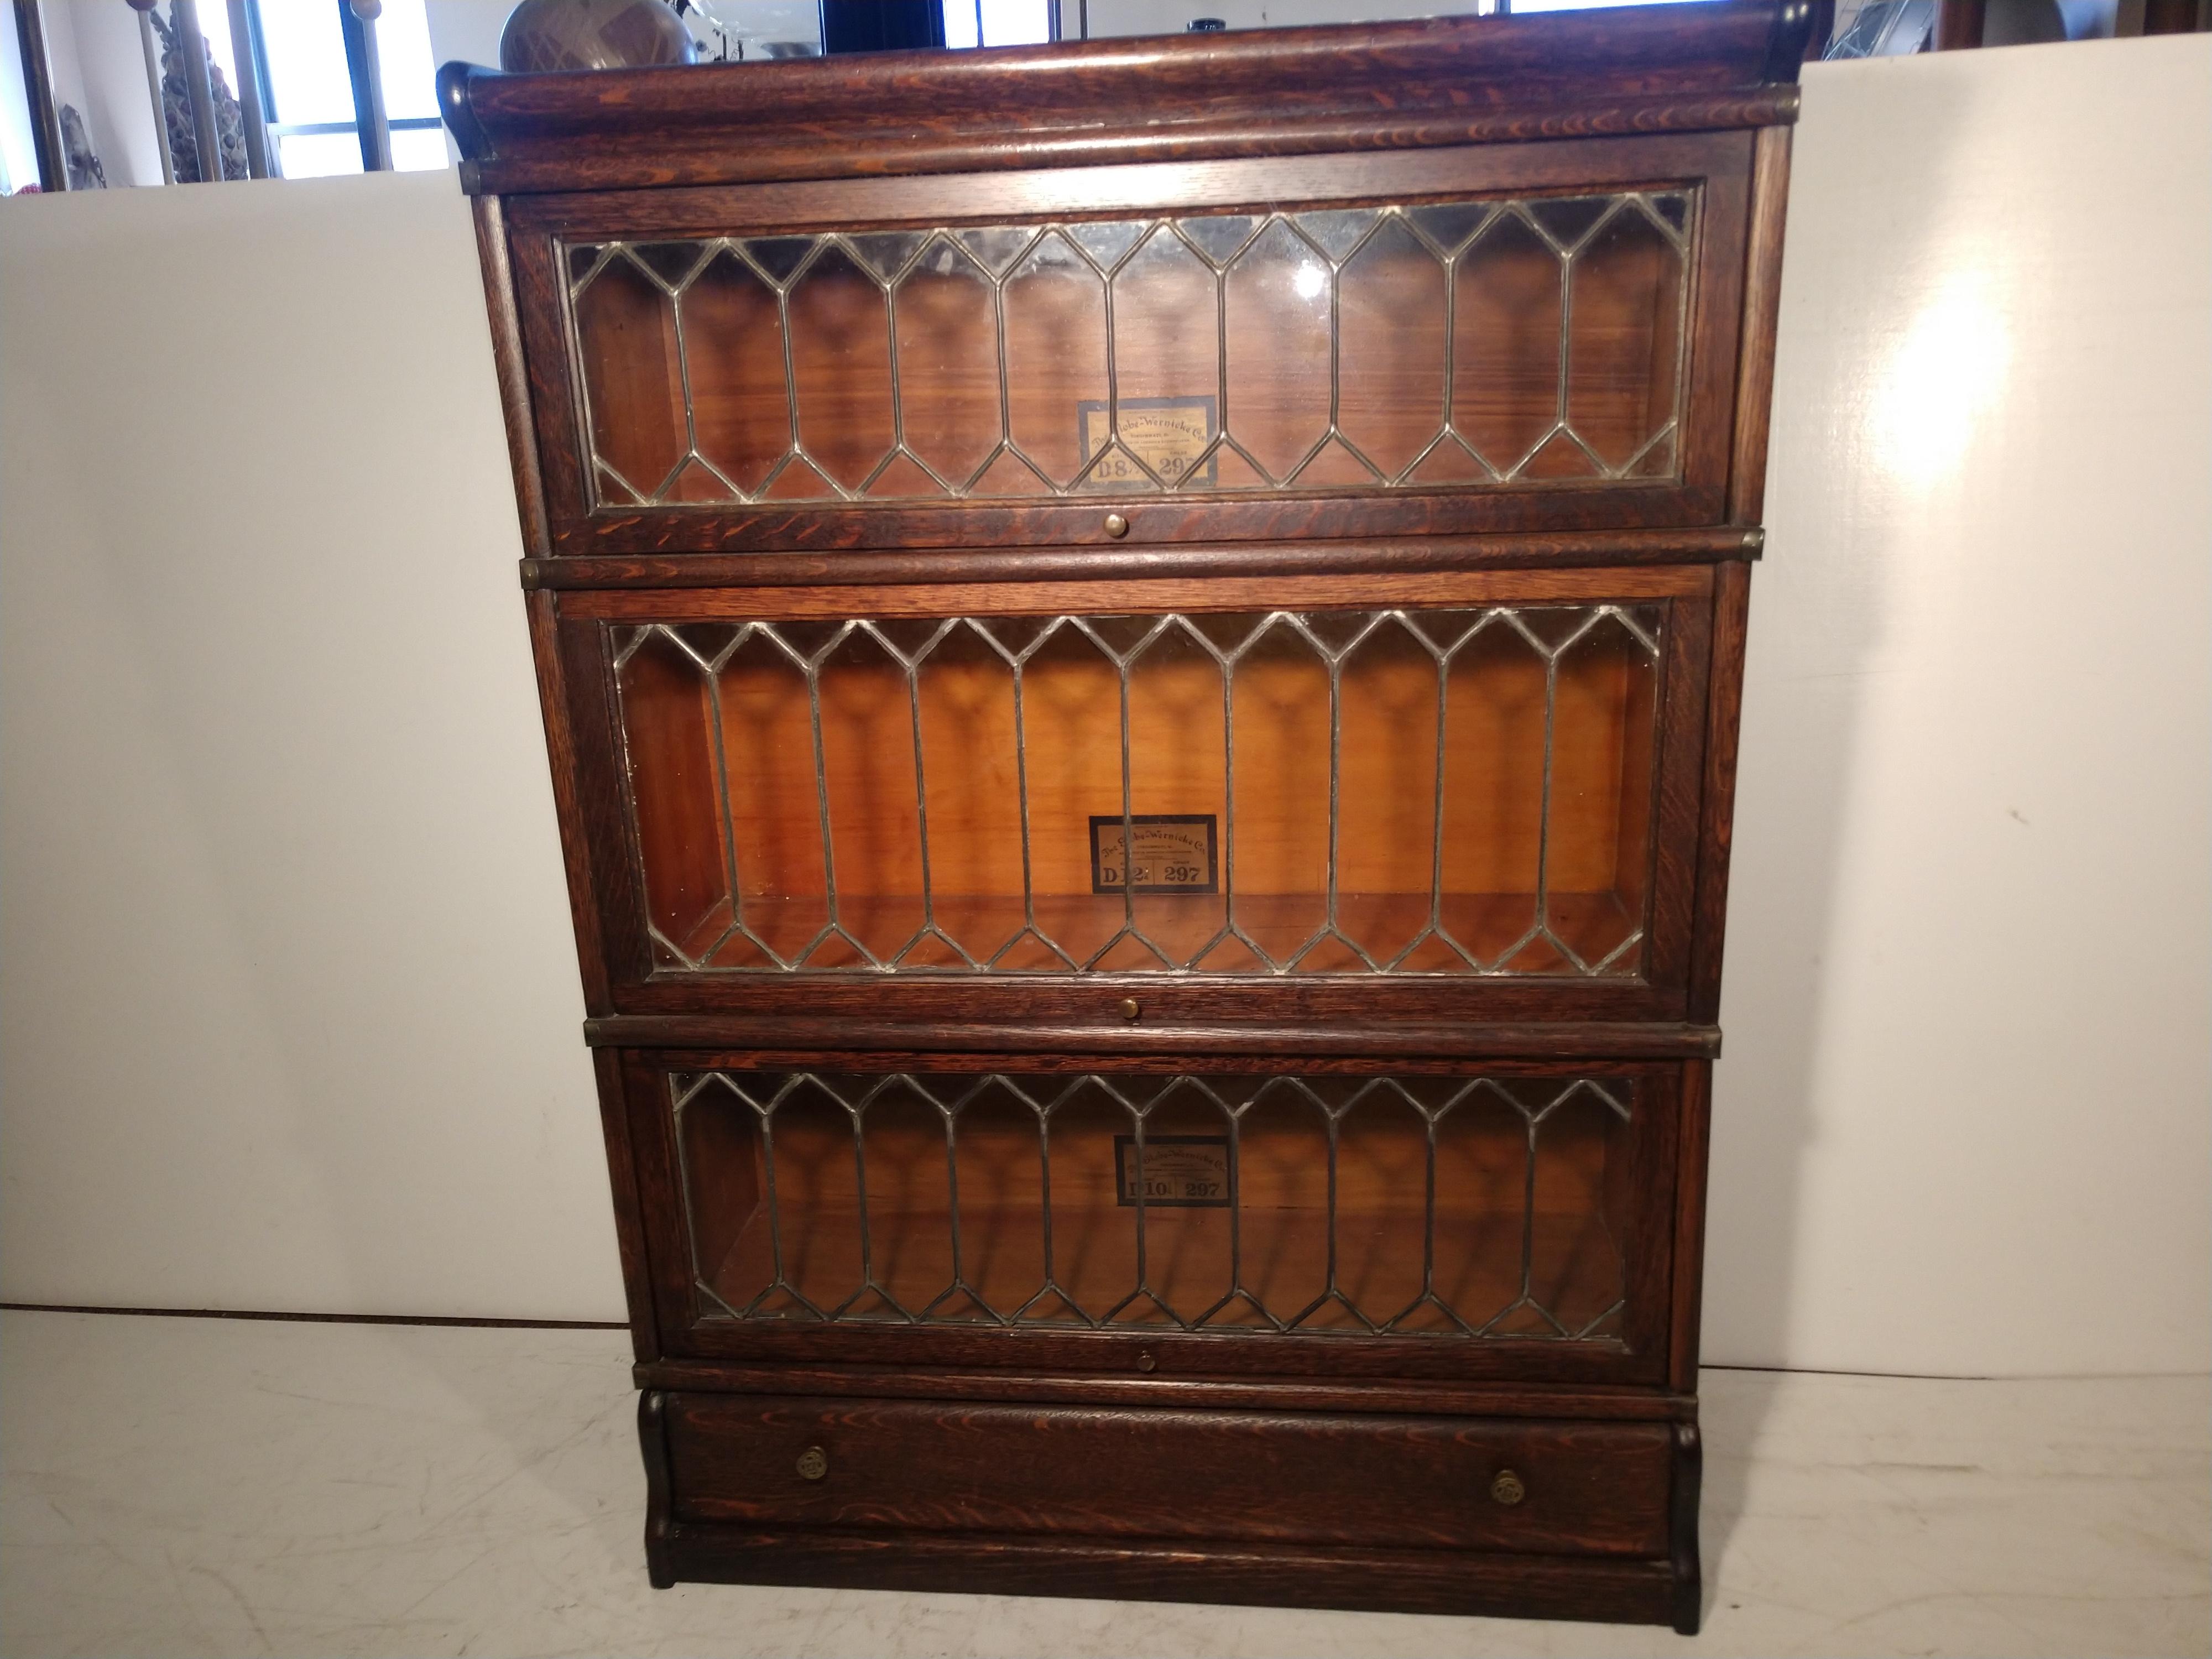 Early 20th Century Globe Weinecke Leaded Glass 5 Section Barrister Bookcase